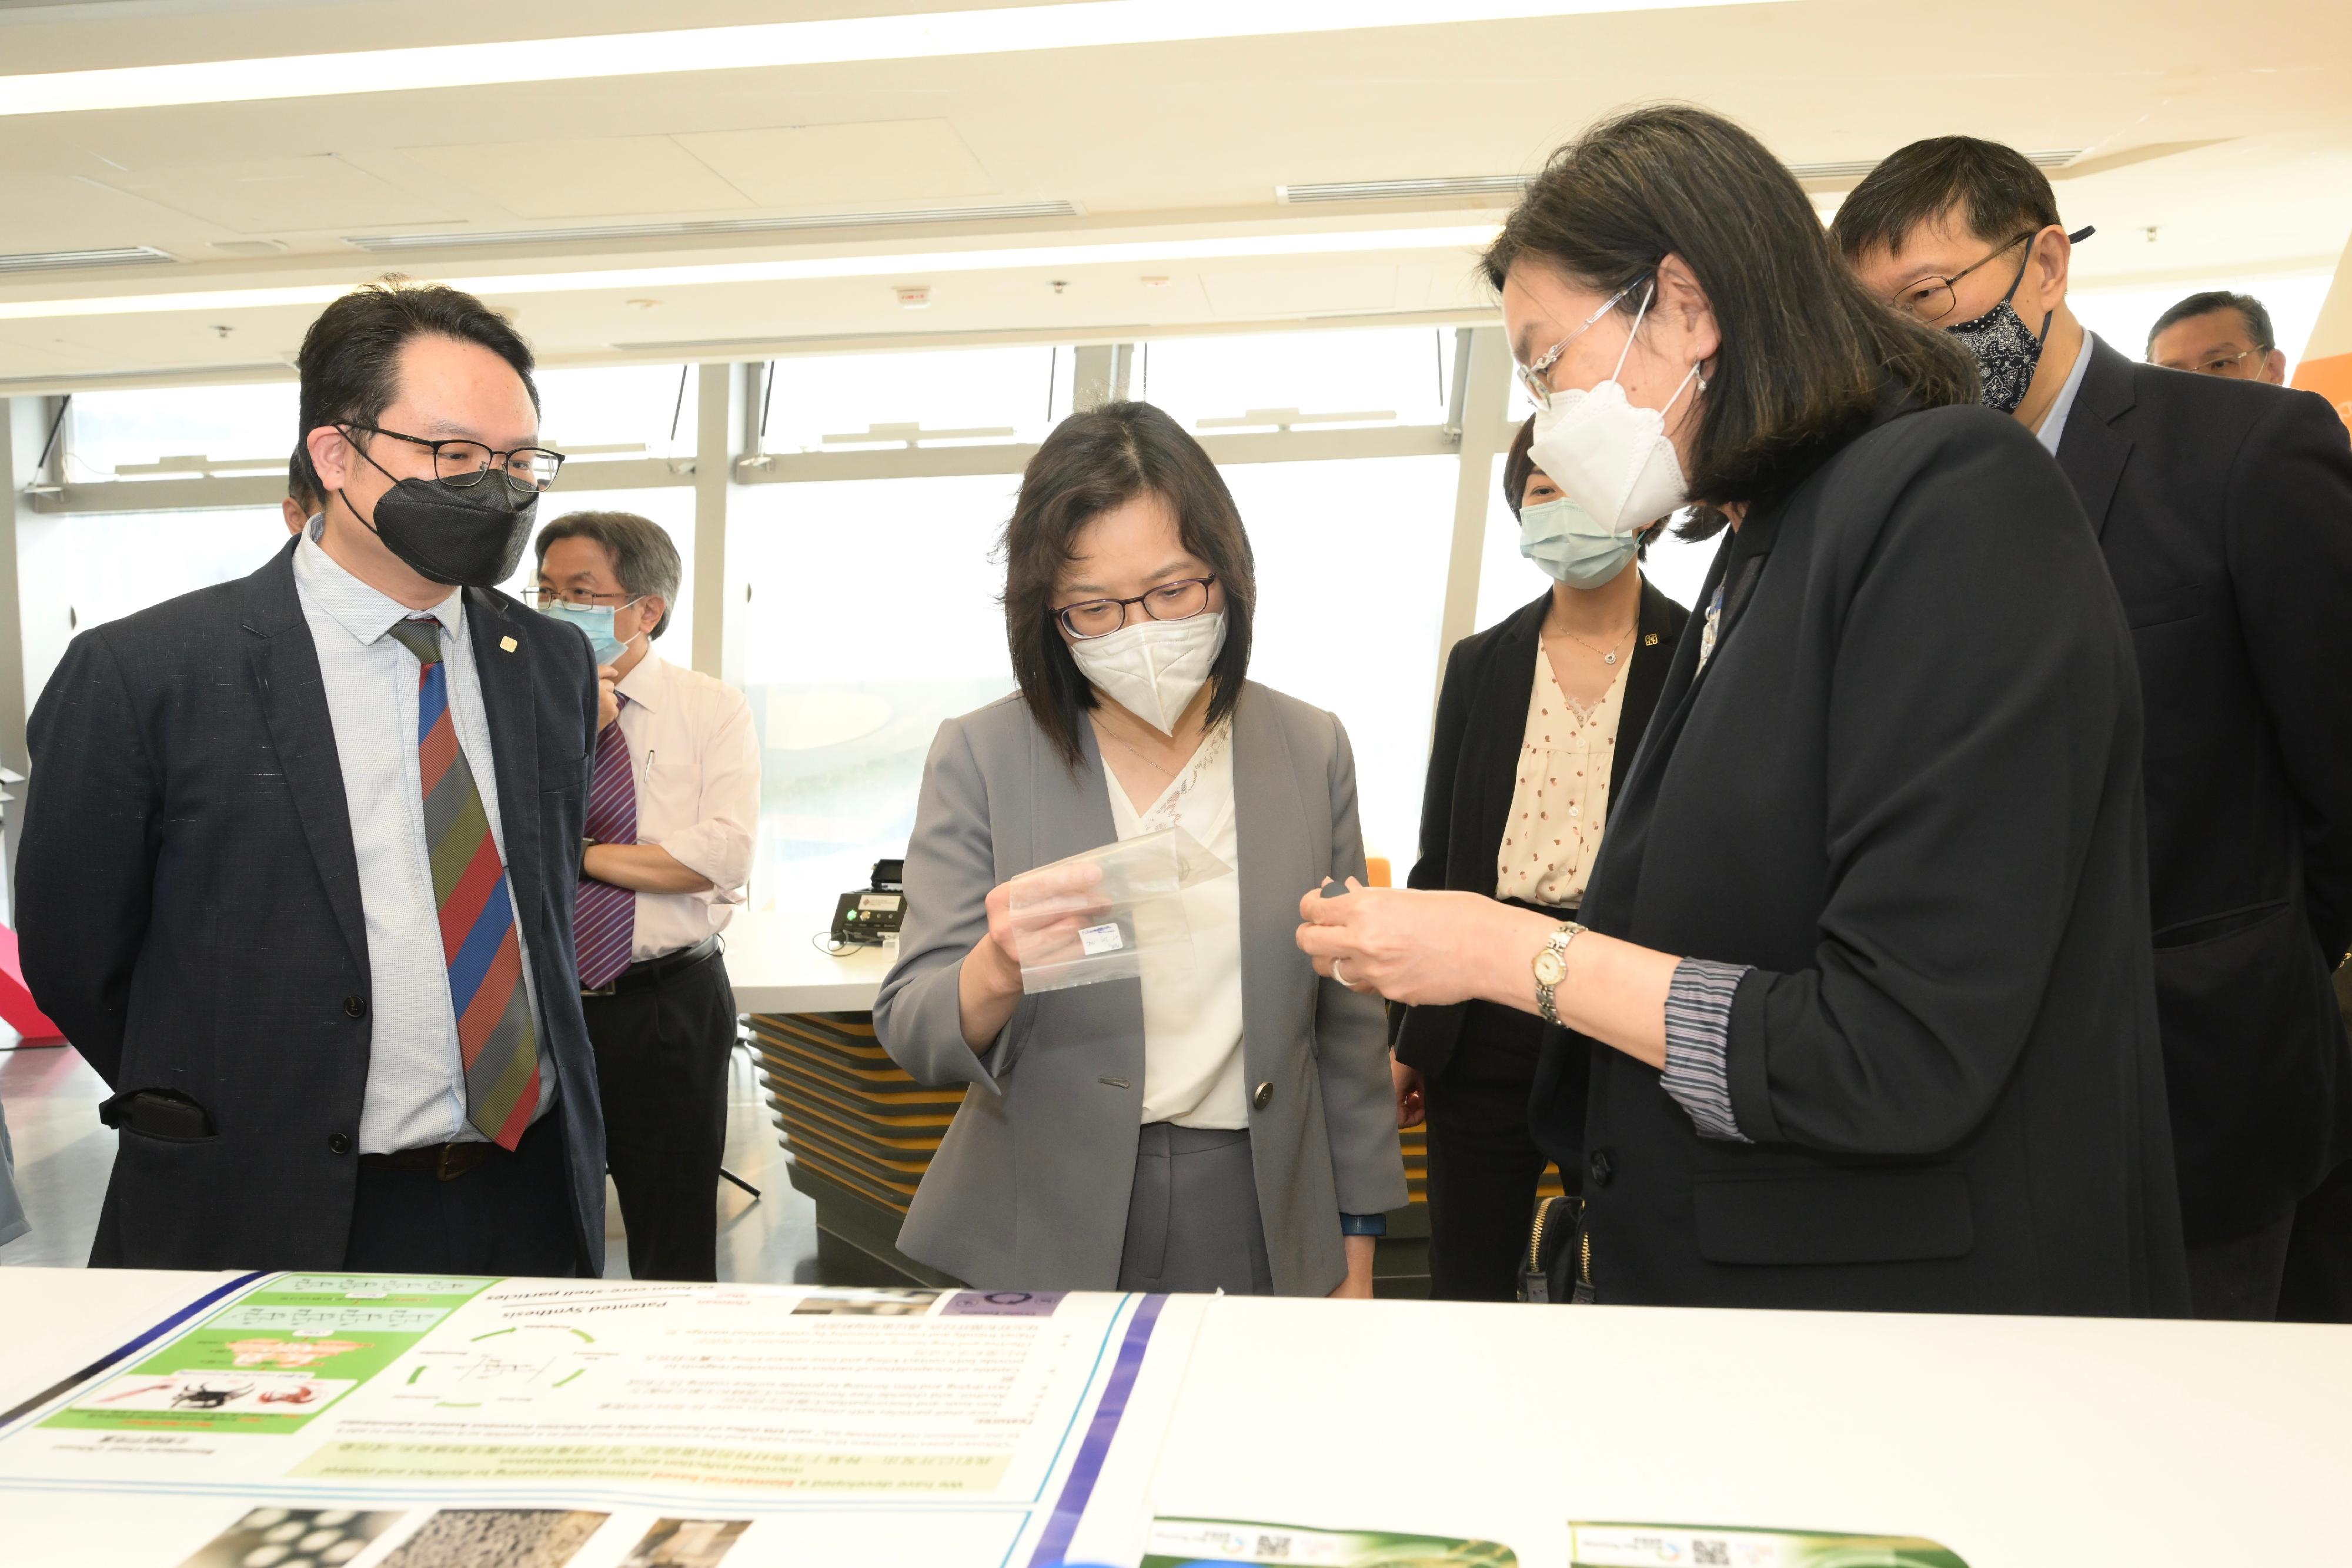 The Commissioner for Innovation and Technology, Ms Rebecca Pun, visited the Hong Kong Polytechnic University on April 27 and met with research teams. Photo shows Ms Pun (second left) receiving a briefing on CareCoatex, an antibacterial and antiviral coating.